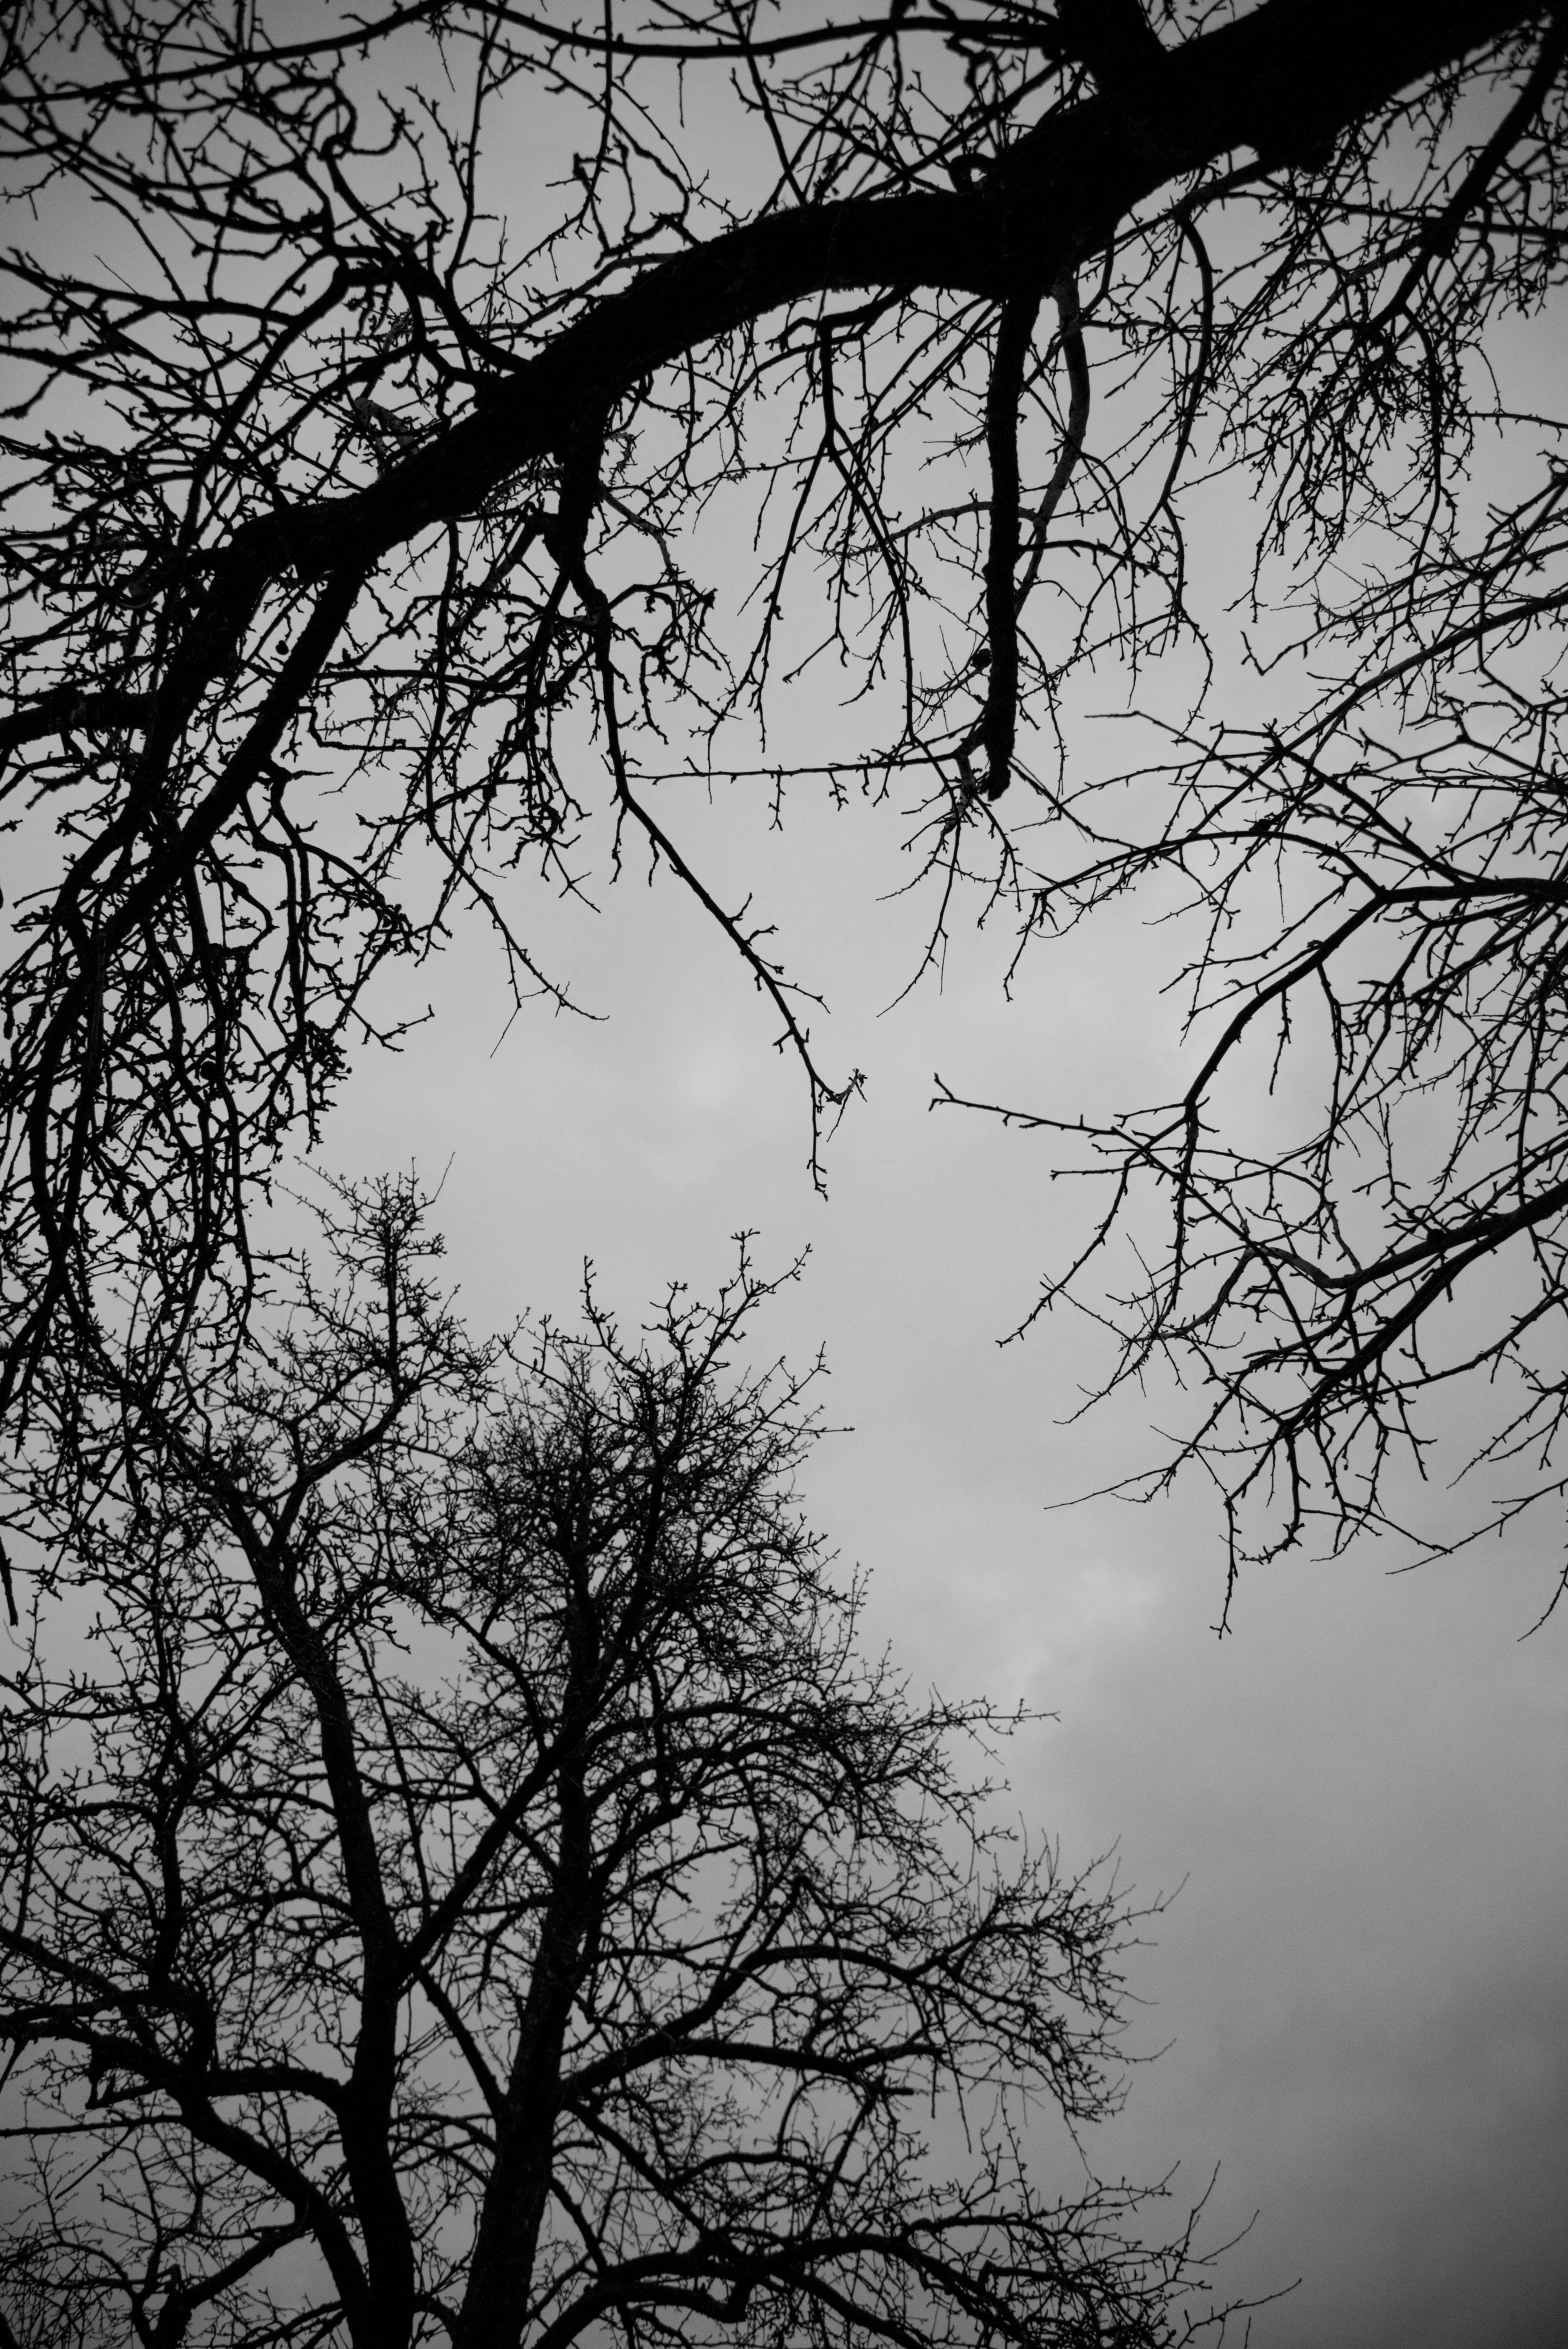 some bare trees against a gloomy sky with no leaves